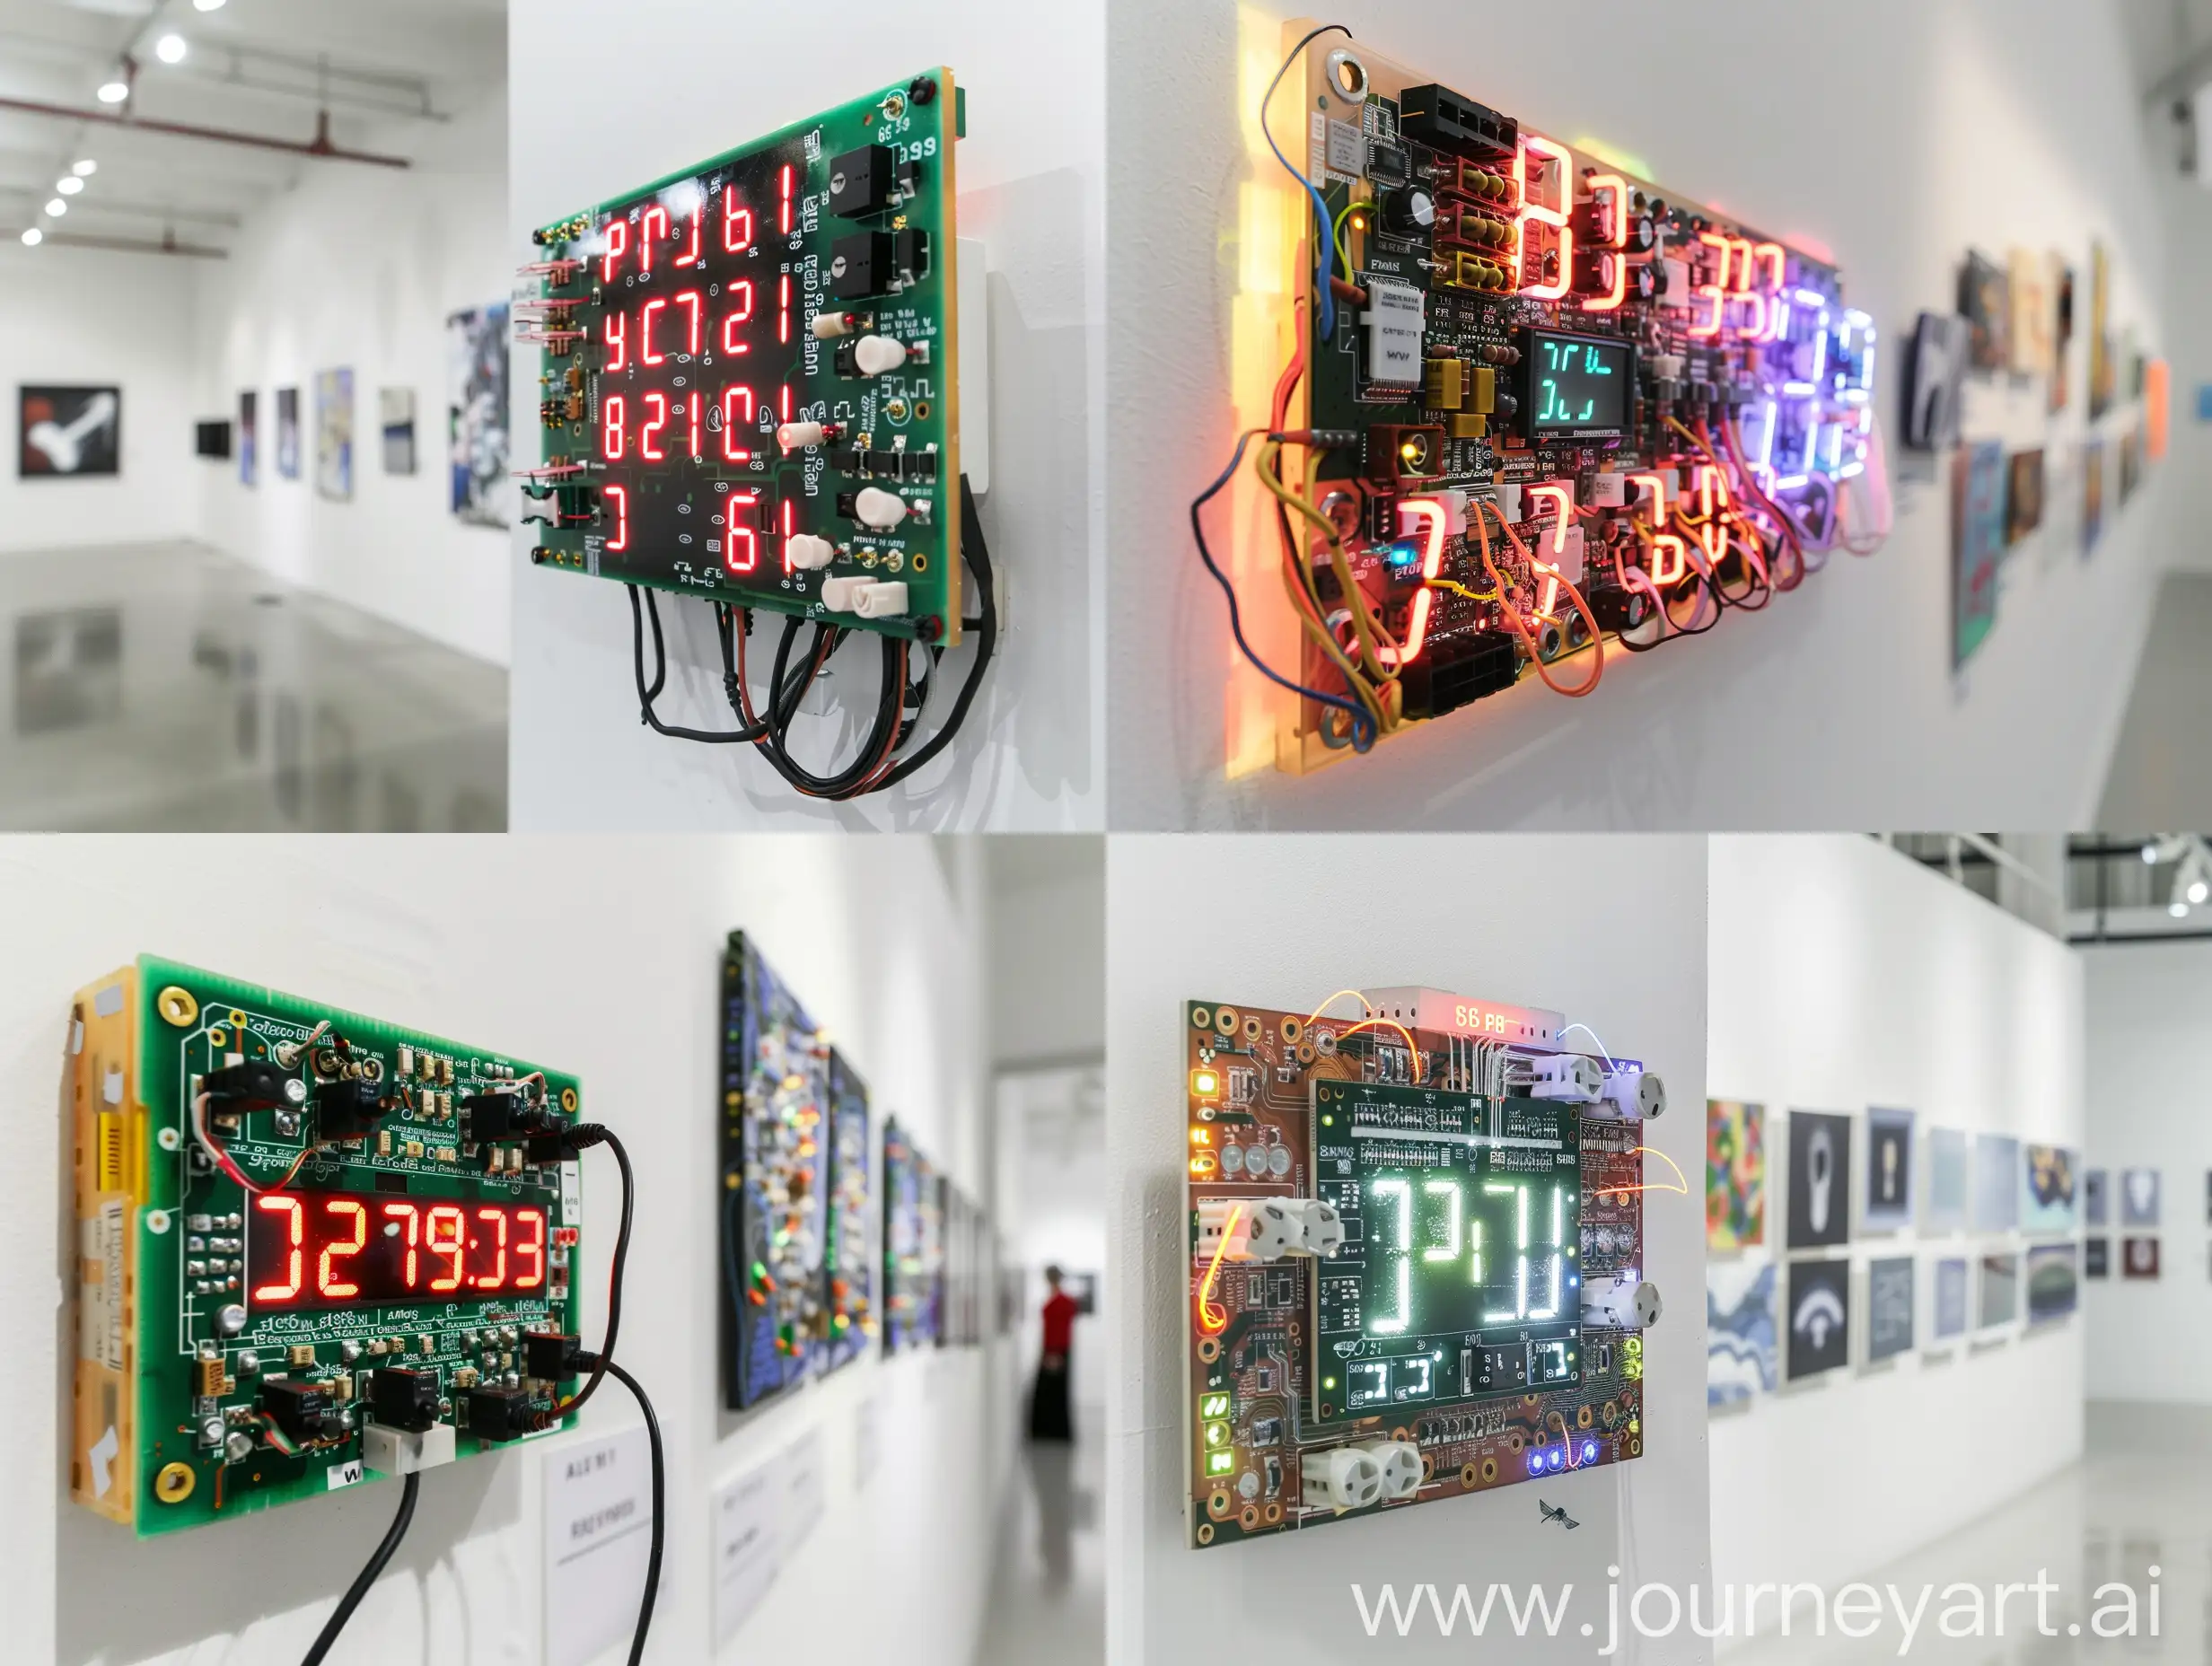 rack mounted arduino circuit board with multipule sensors used to detect ghostly energy and hauntings with a number display generating random numbers in a contemporary art gallery white walls design architect product